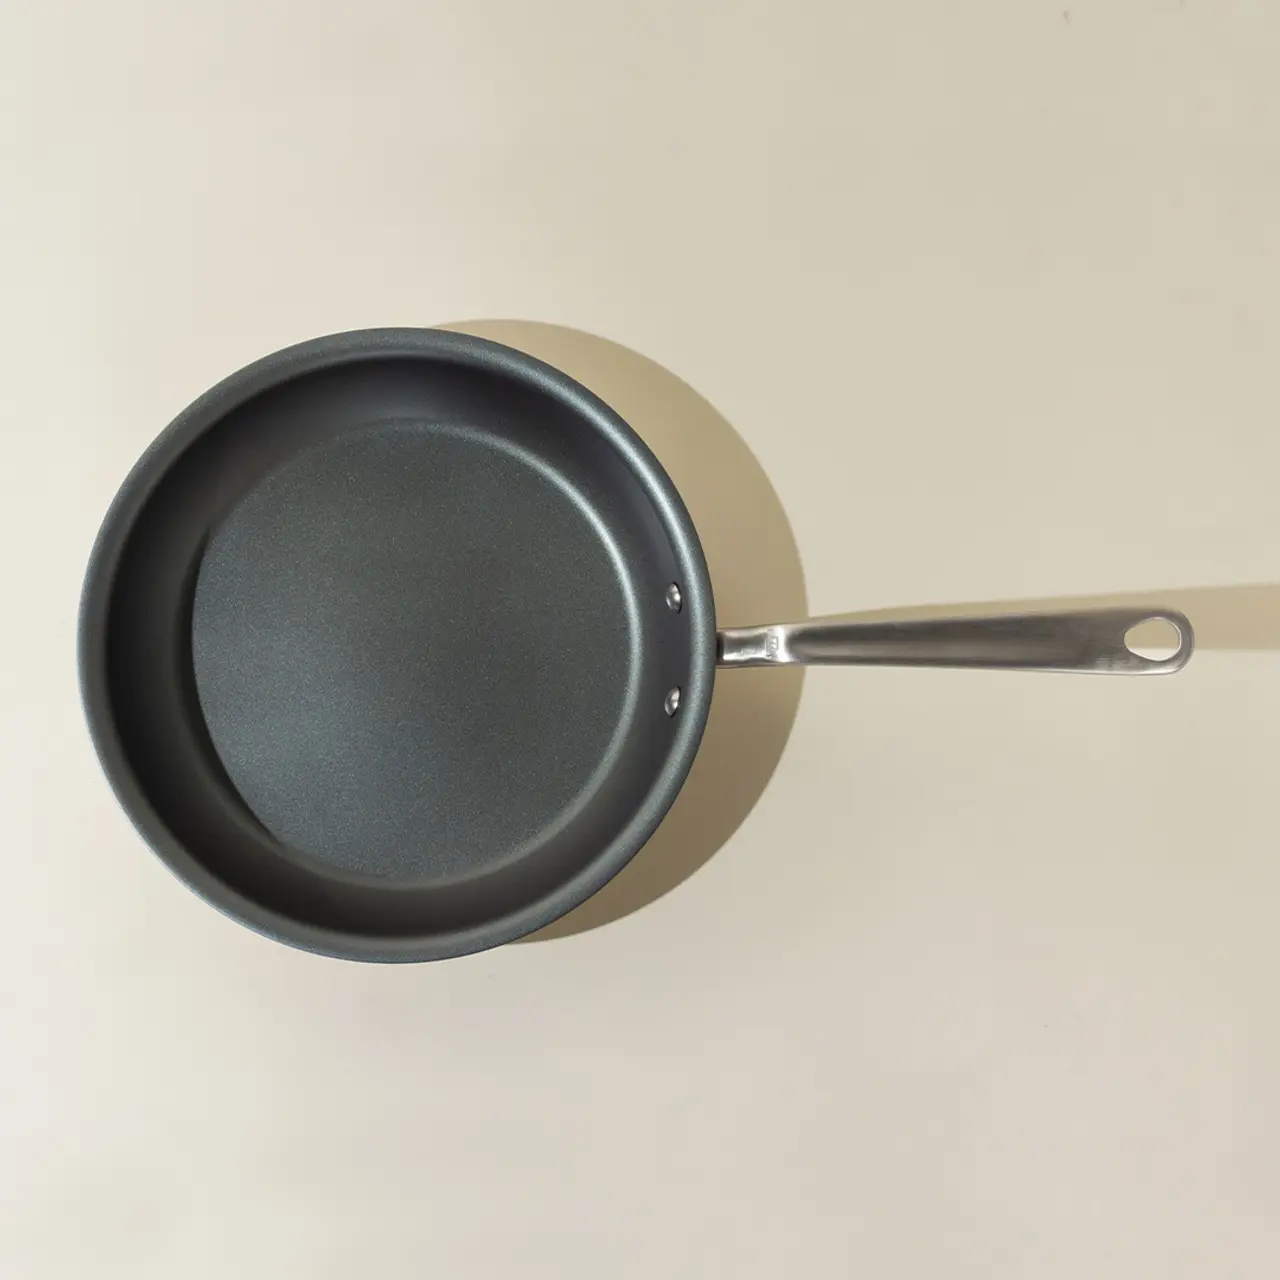 A non-stick frying pan with a stainless steel handle is positioned on a beige surface.